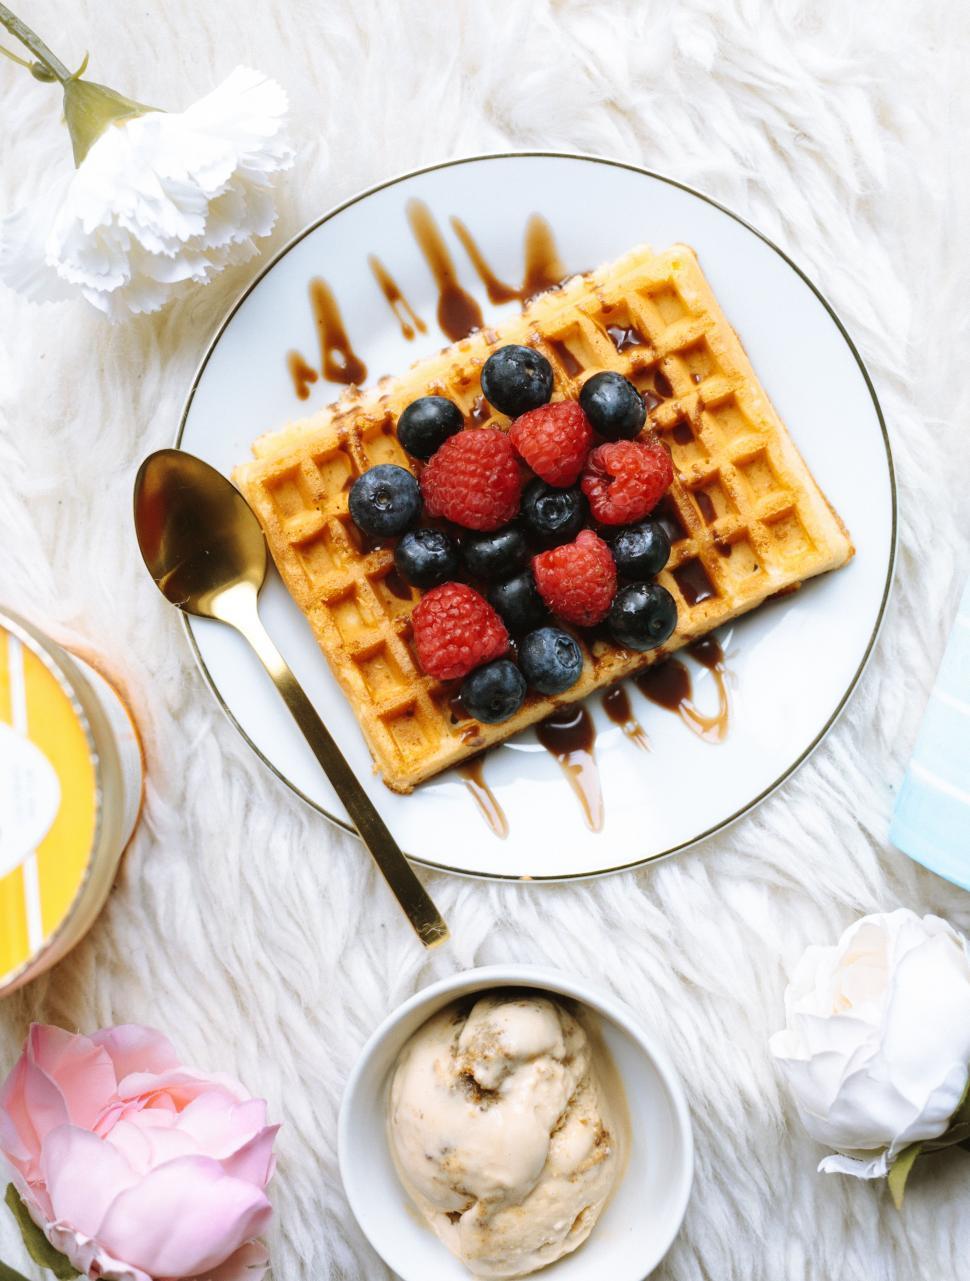 Free Image of A plate of waffles with berries and syrup on top 